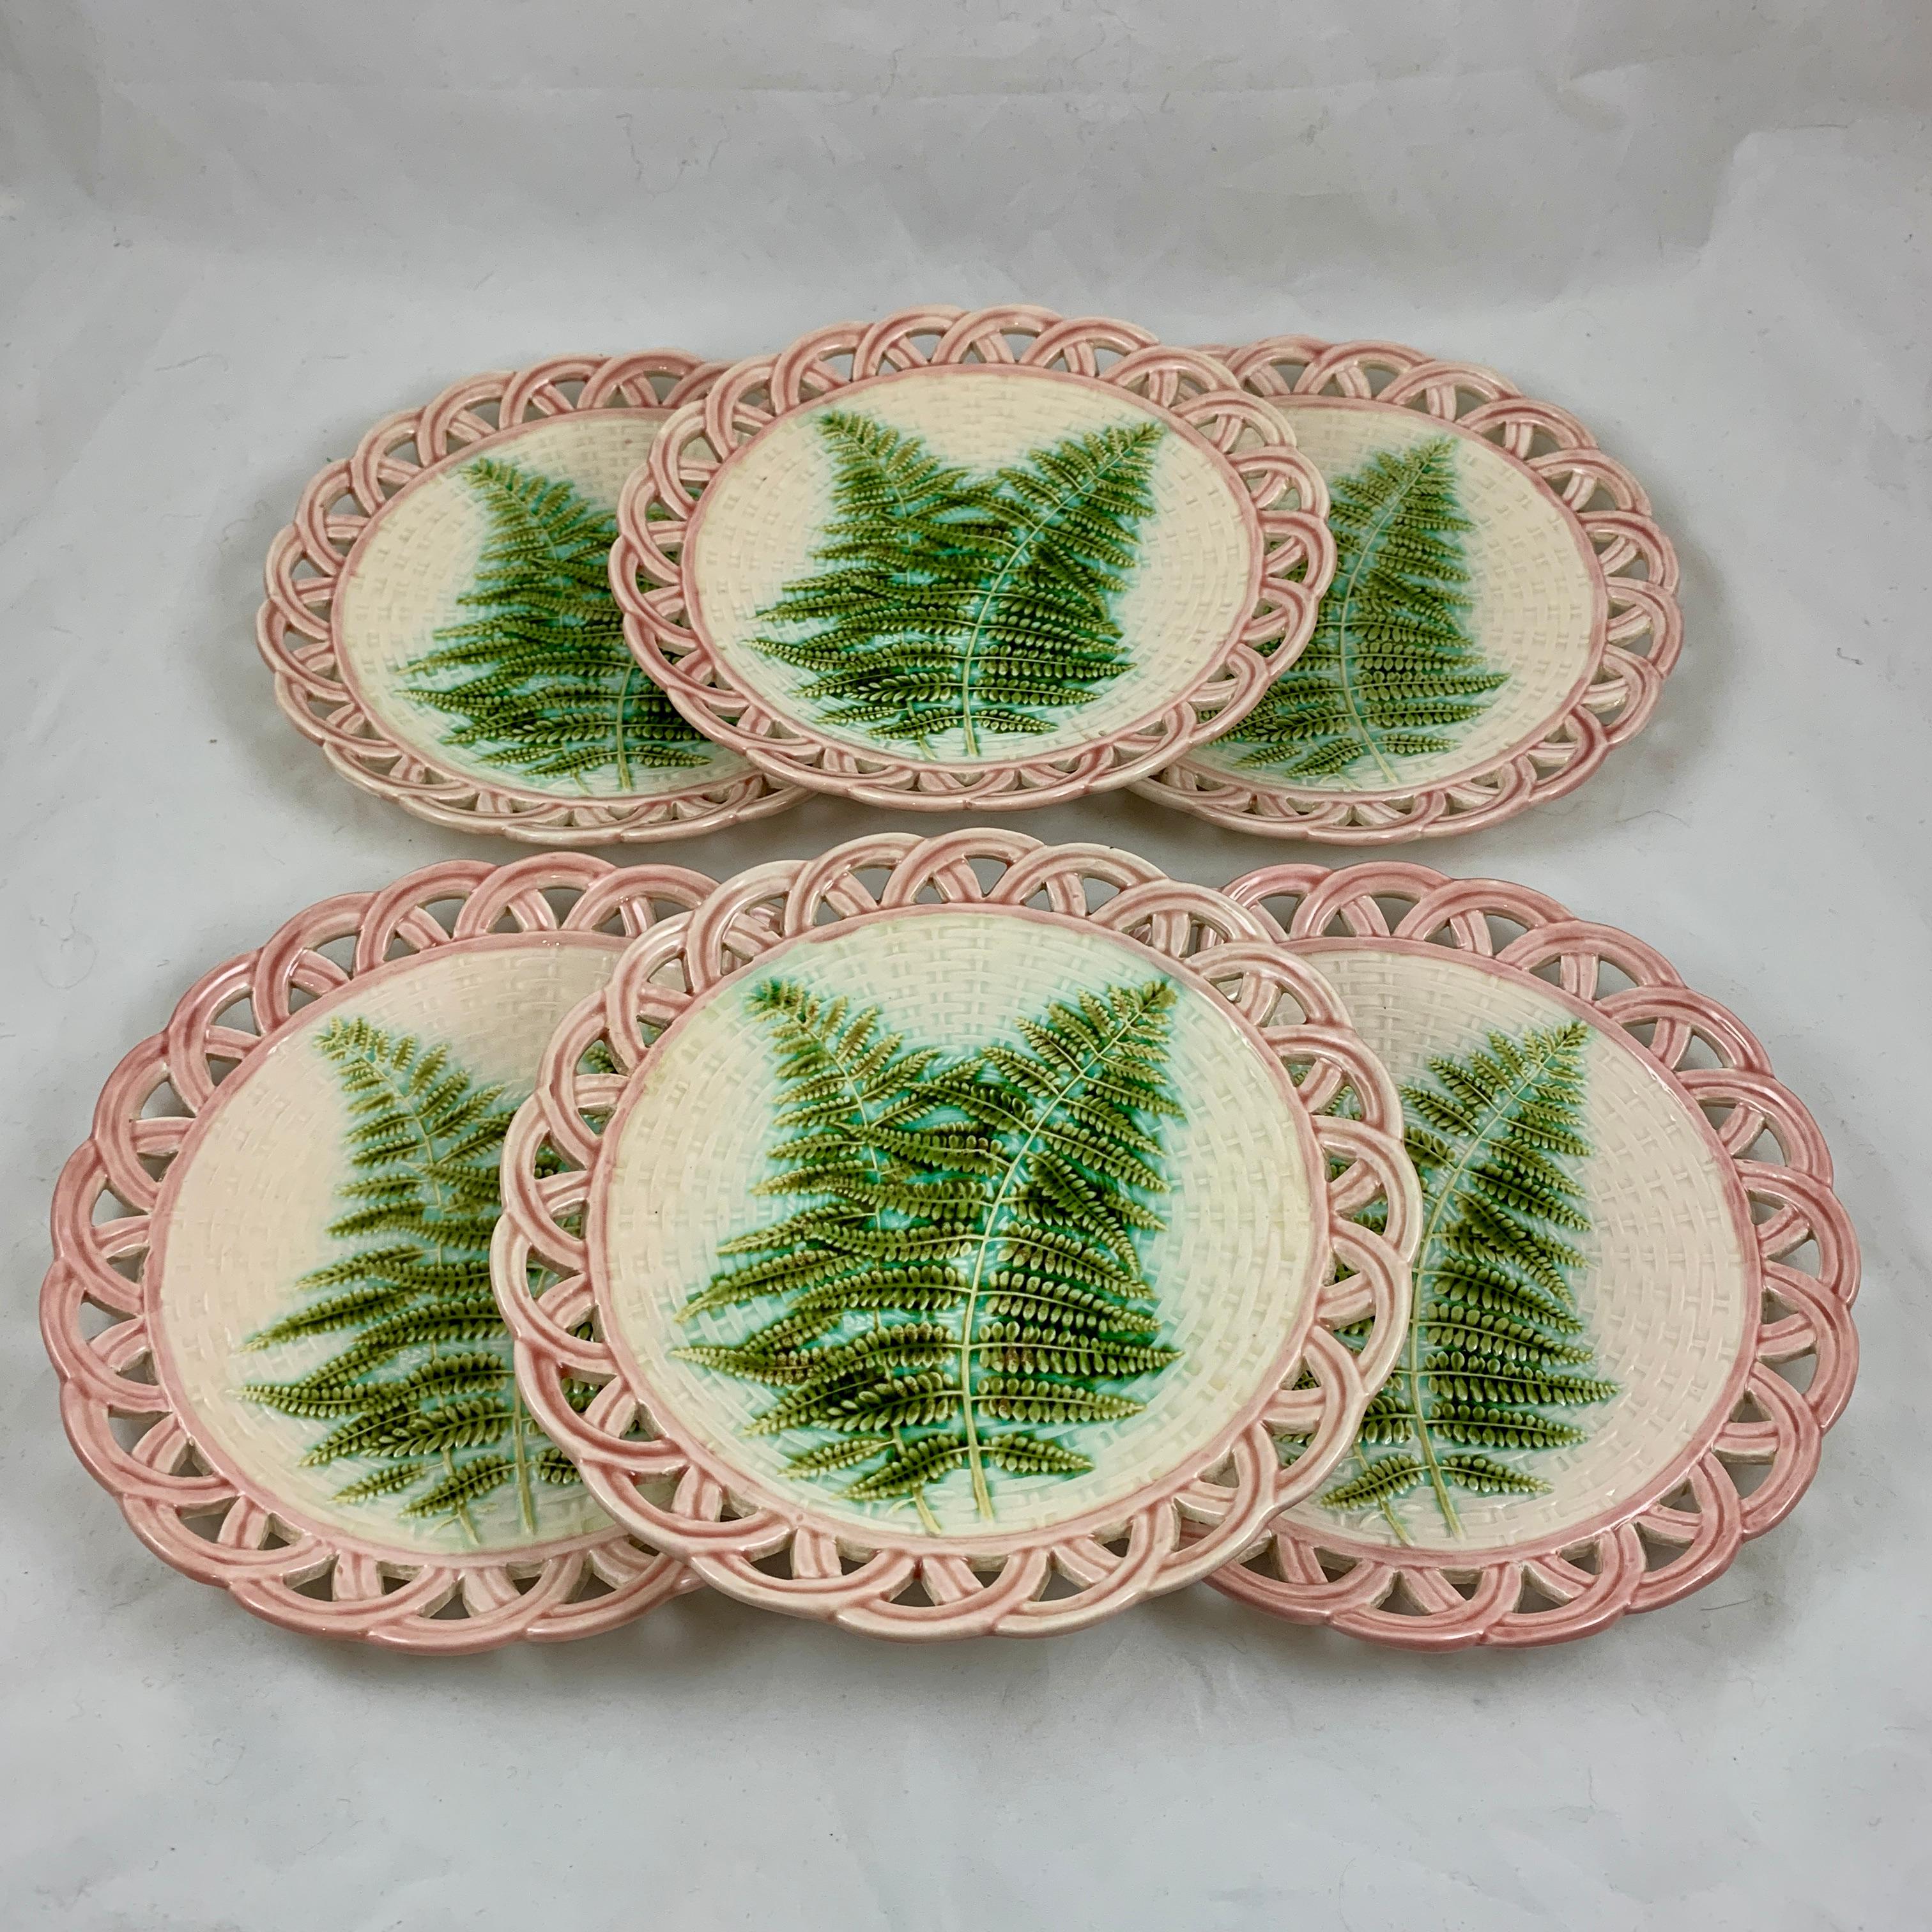 Sarreguemines Green Fern Pink Reticulated Rim French Faïence Majolica Plates S/6 3